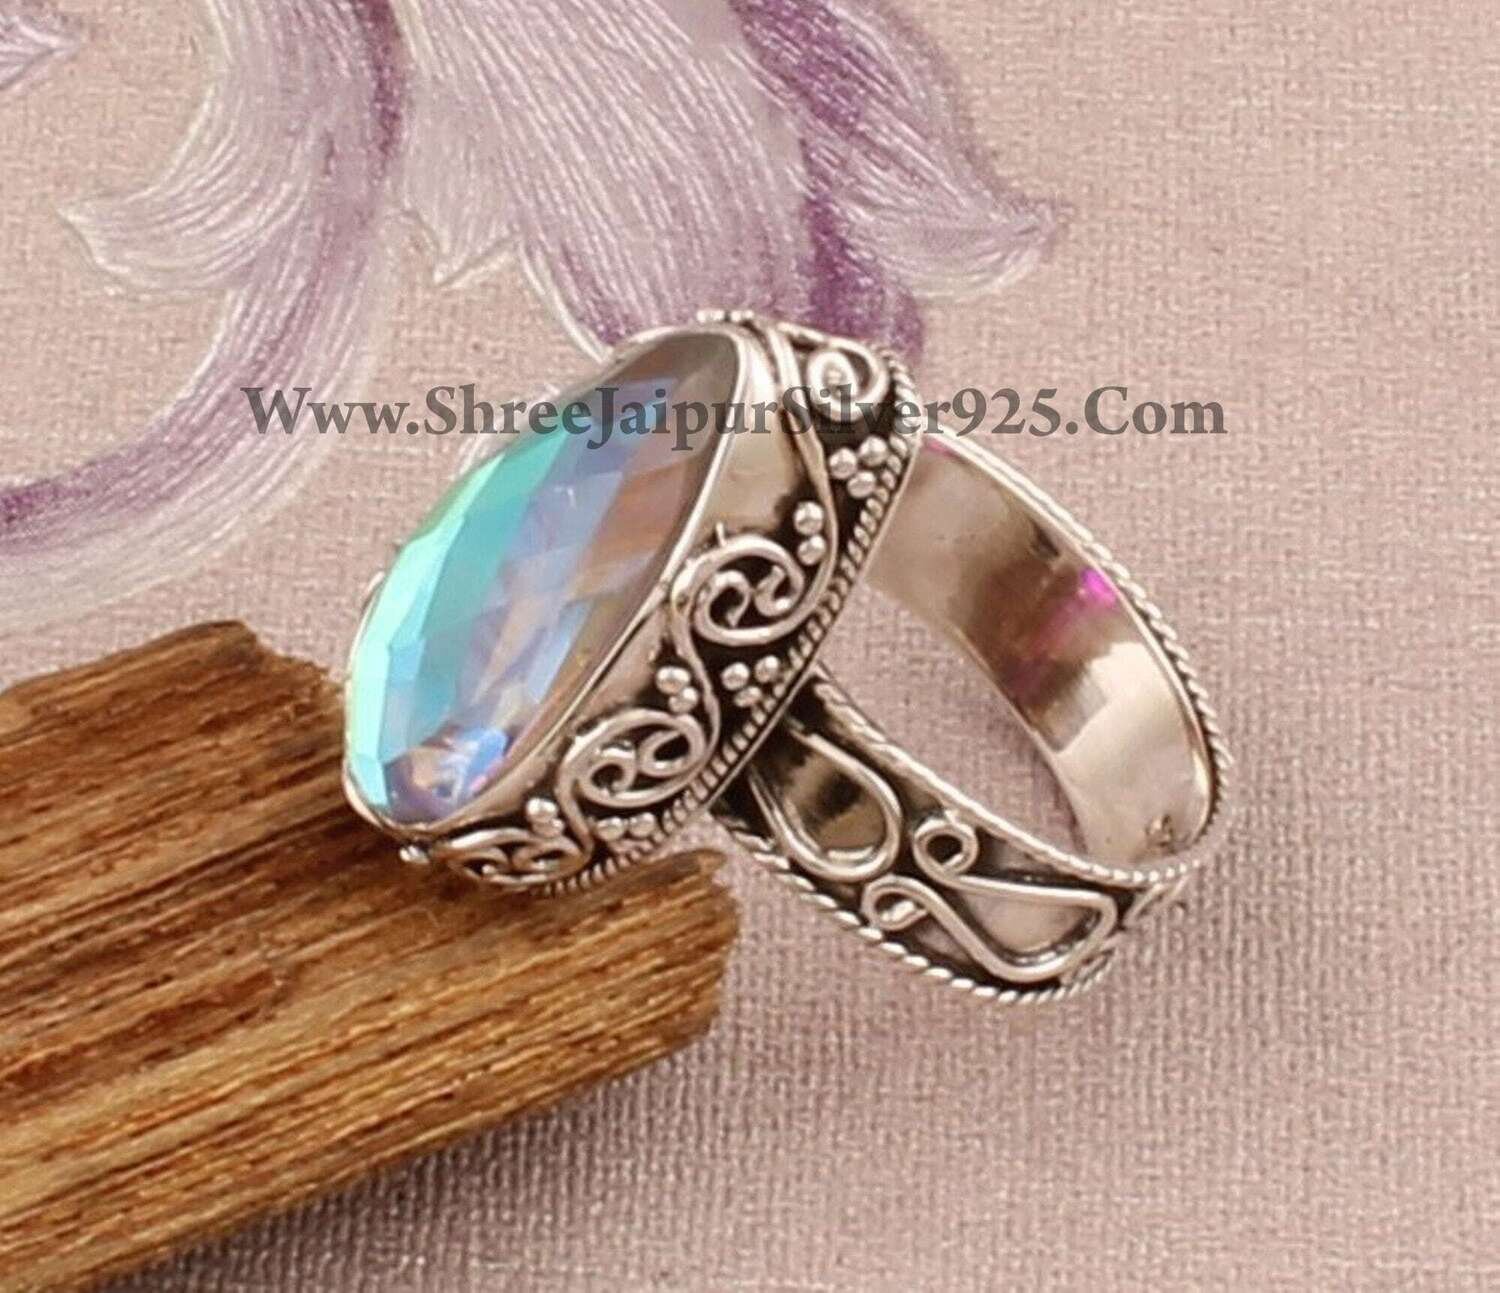 925 Sterling Silver Faceted Rainbow Quartz Gemstone Ring, Designer Handmade Engraved Silver Ring, Valentine's Day Gift Idea, Etsy Cyber 2021